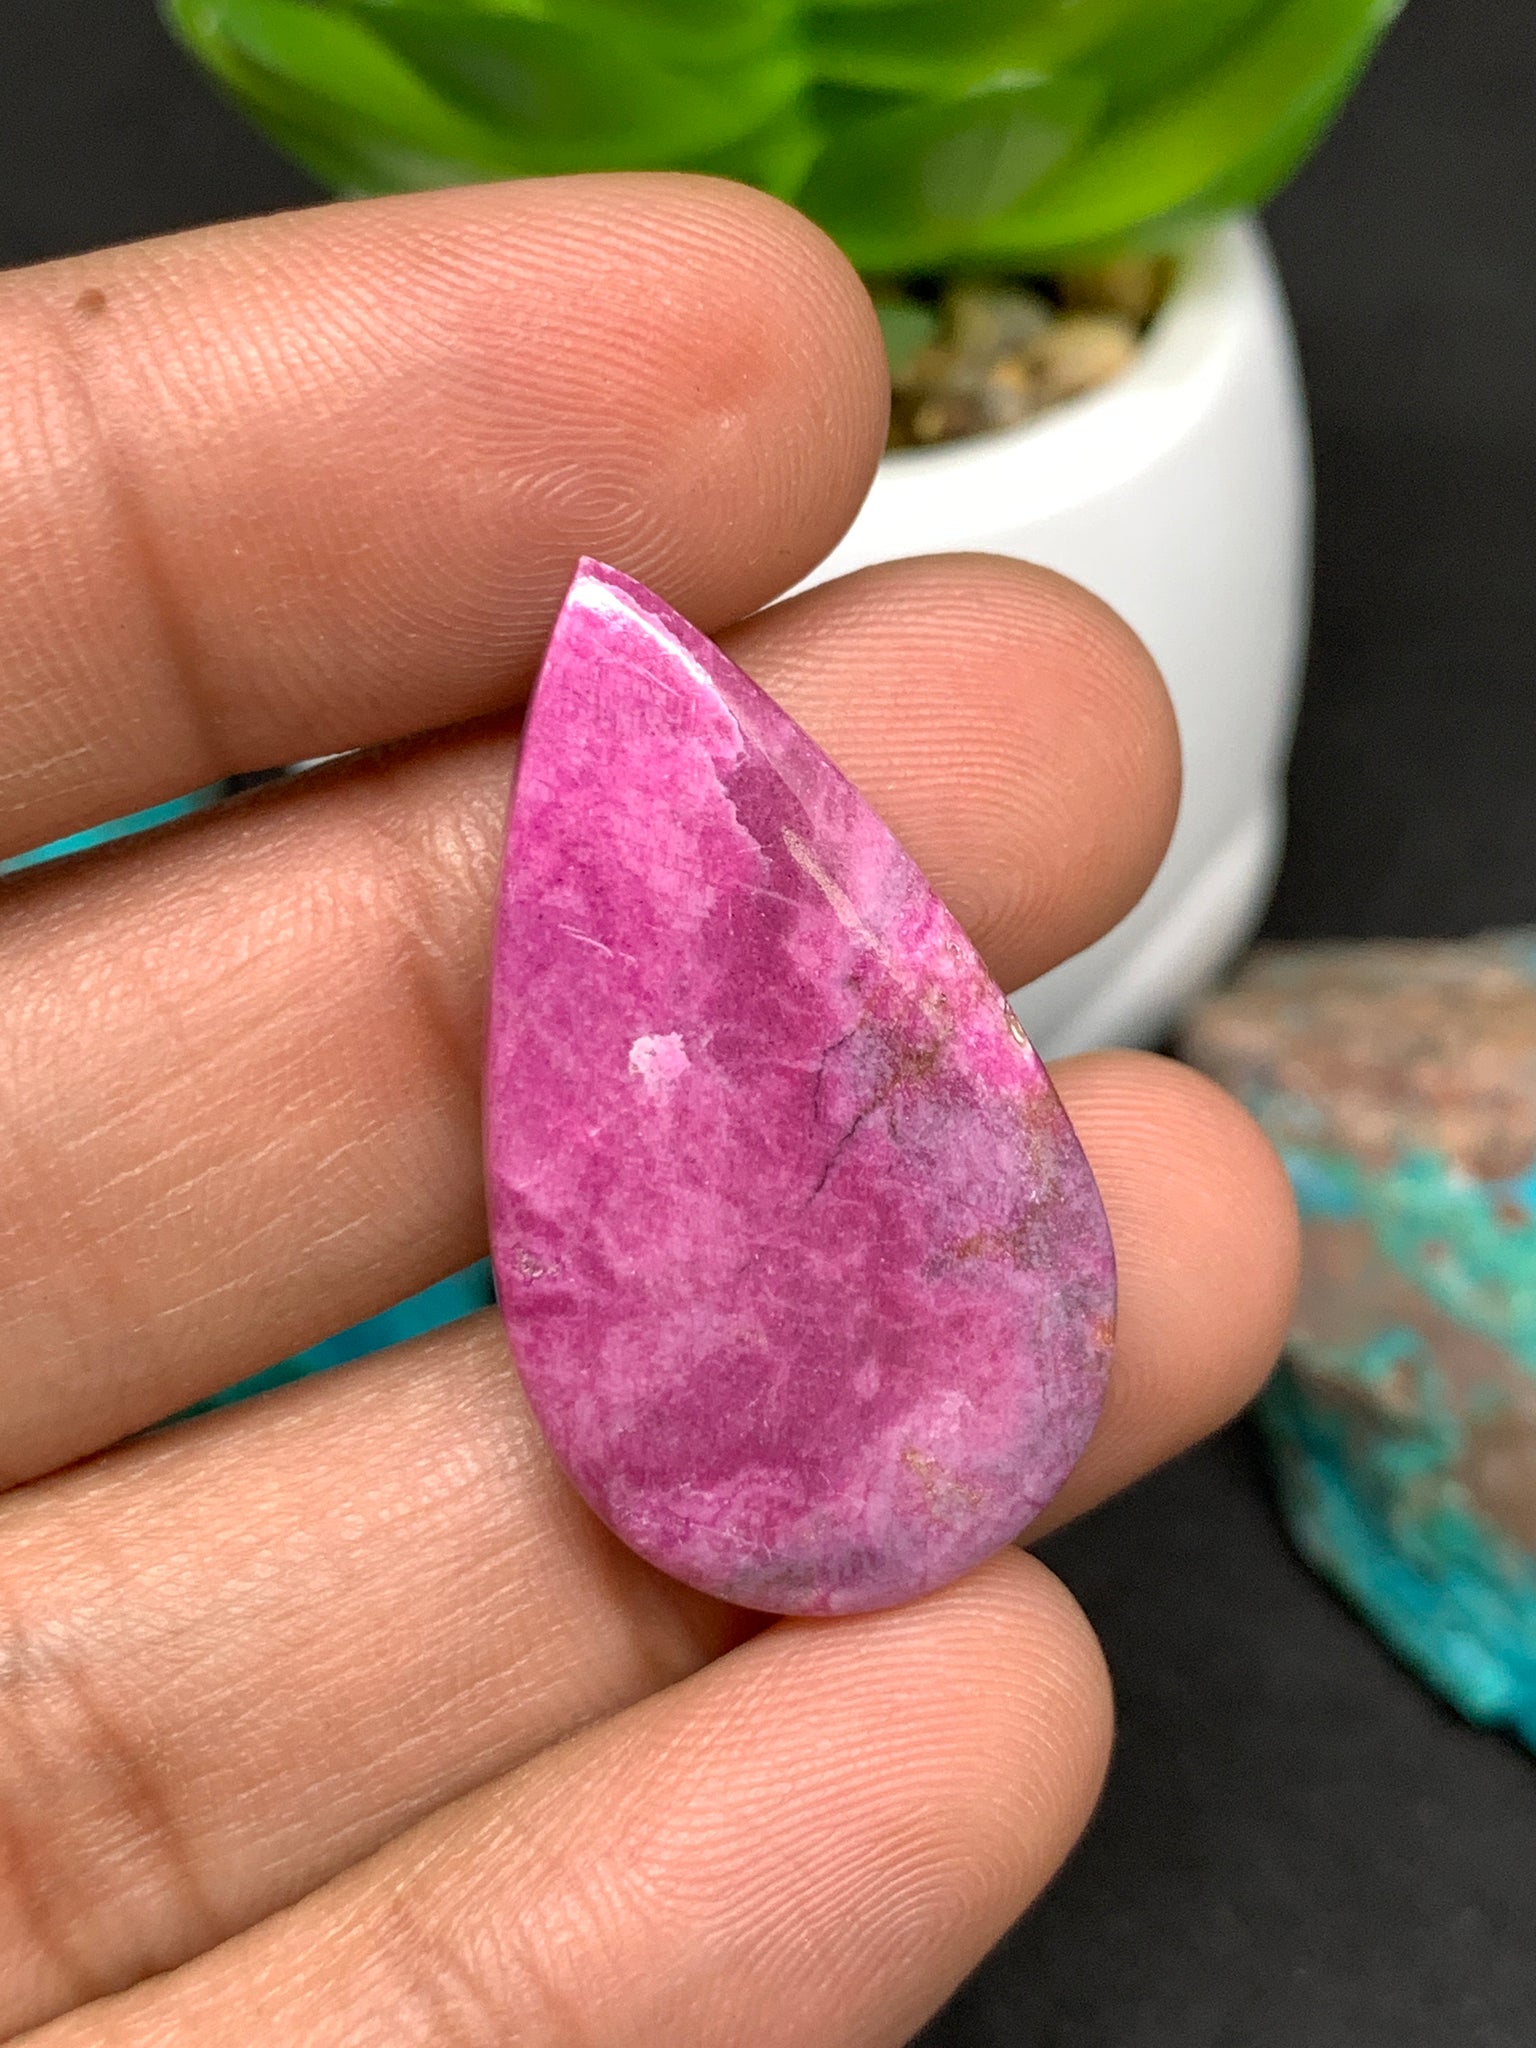 Cobalto Calcite or Pink Drusy Cabochon #5